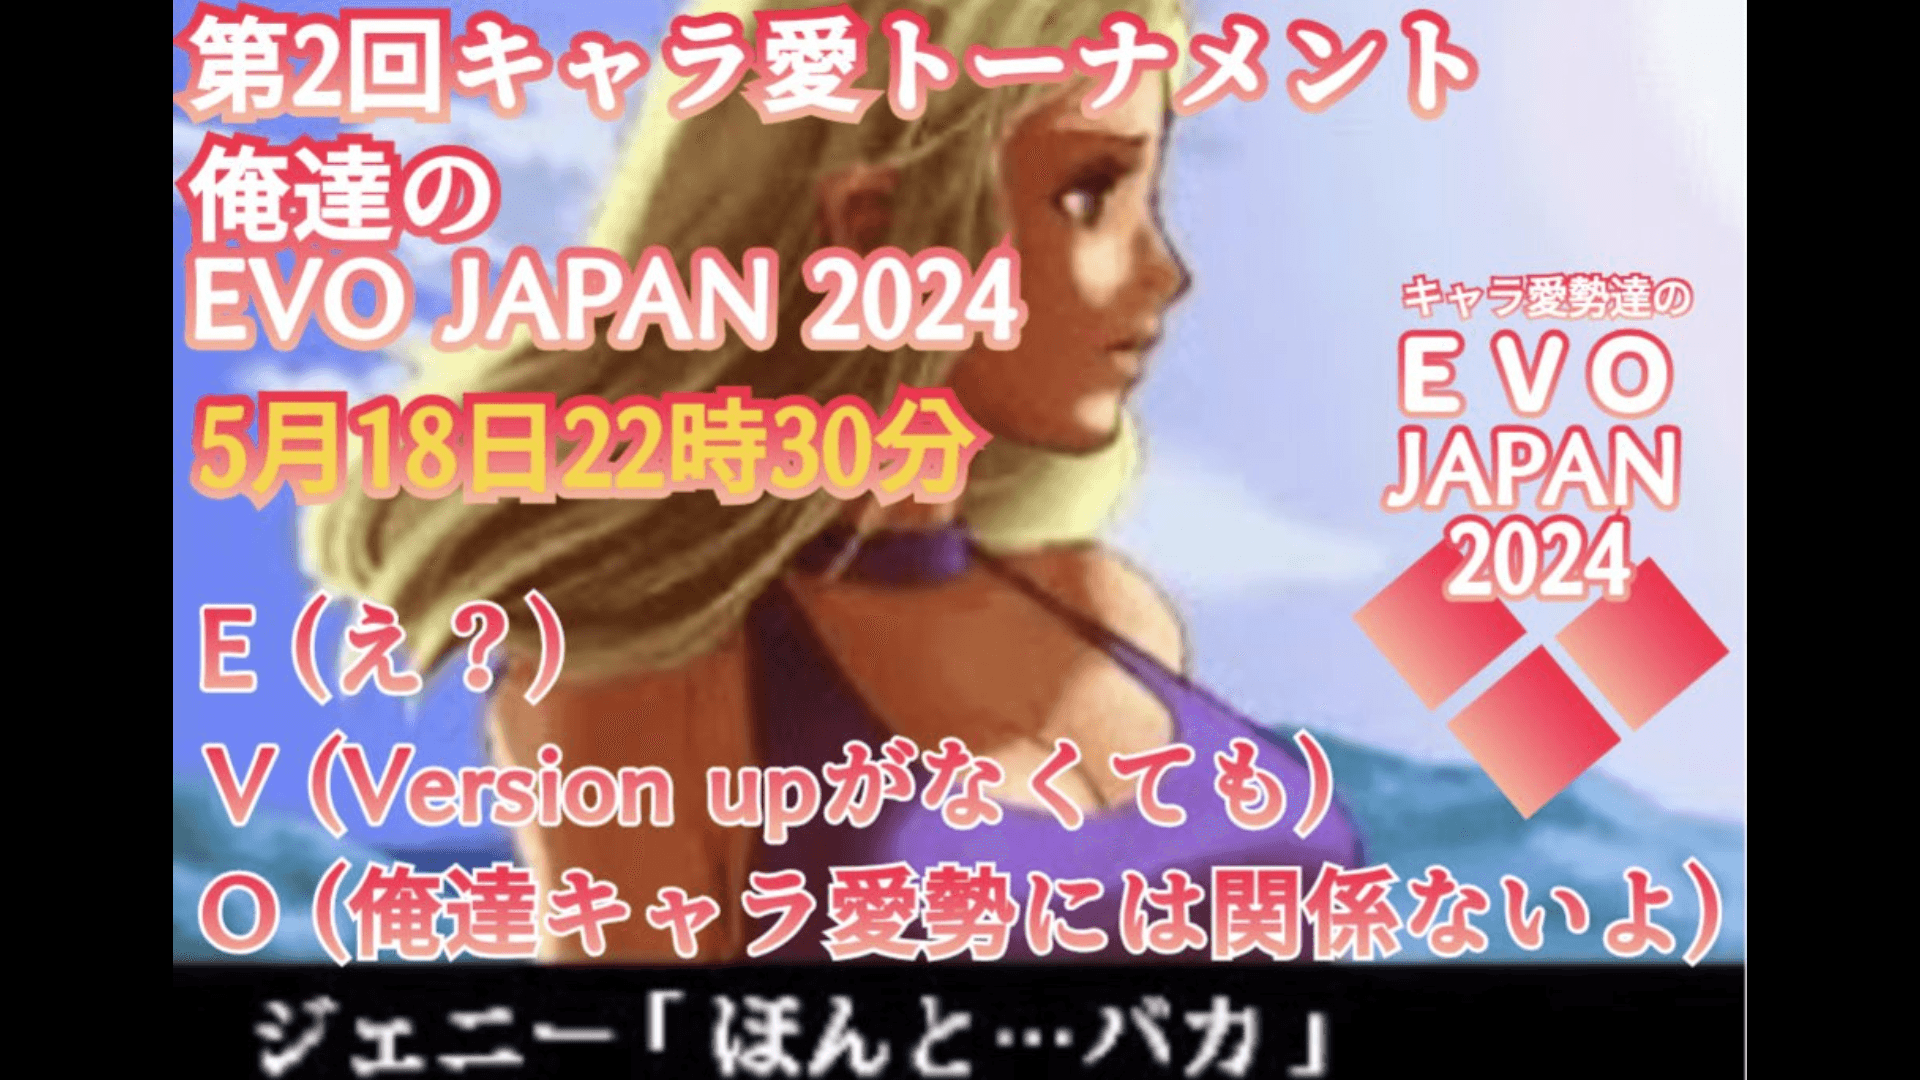 THE KING OF FAVORITE～キャラ愛勢達のEVO JAPAN 2024～ feature image